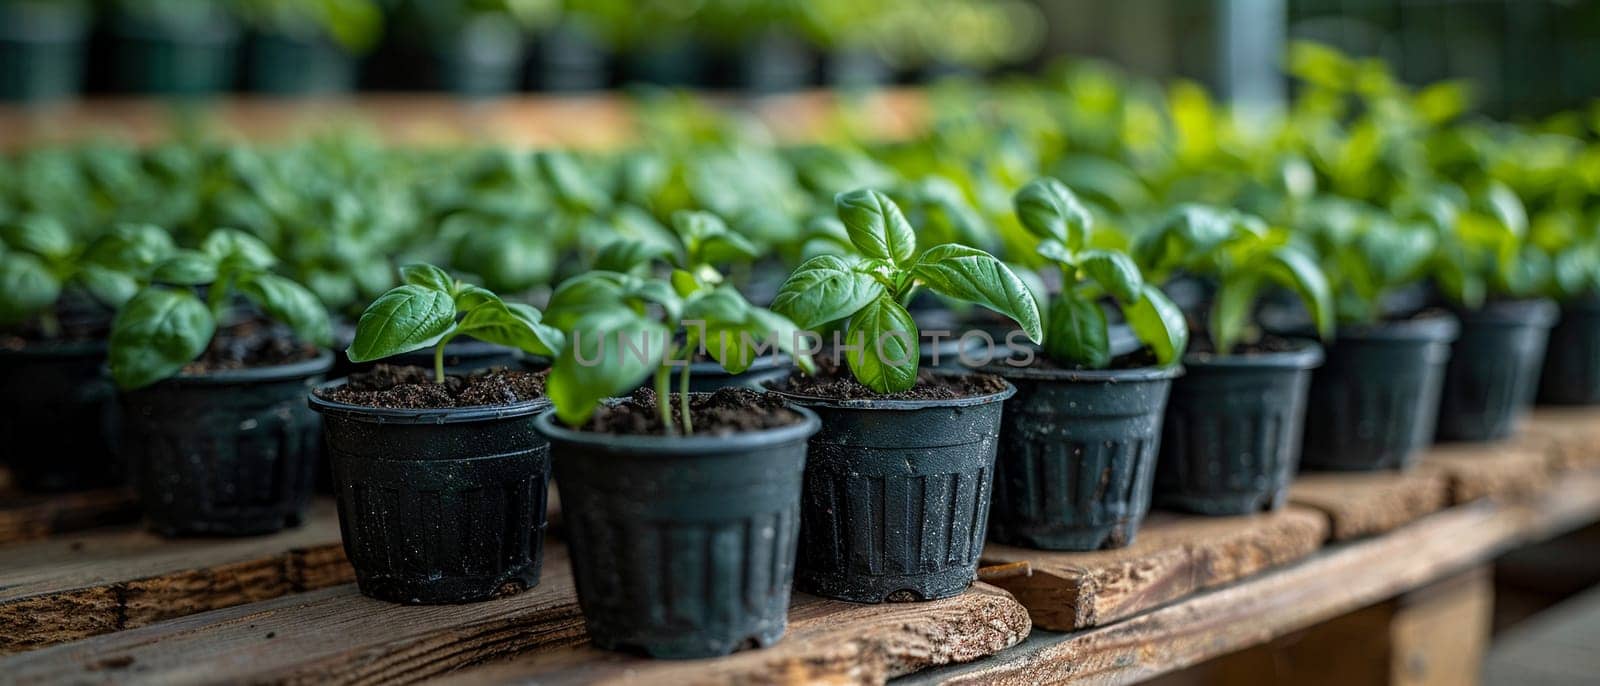 Garden Herb Nursery Seasons Culinary Arts in Business of Flavorful Horticulture, Garden shears and herb seedlings season a story of culinary arts and flavorful horticulture in the garden herb nursery business.